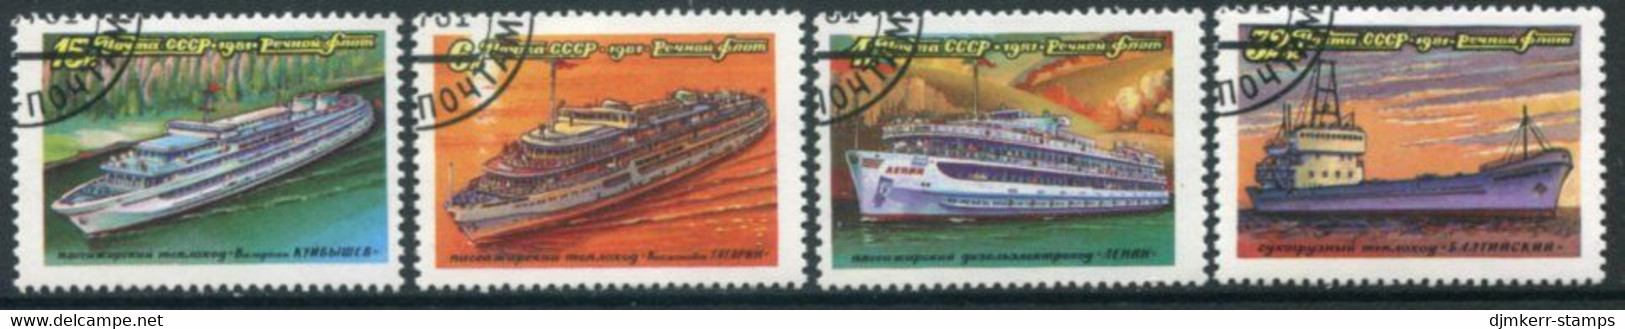 SOVIET UNION 1981 Ships Of Inland Waterways Used  Michel 5088-91 - Used Stamps